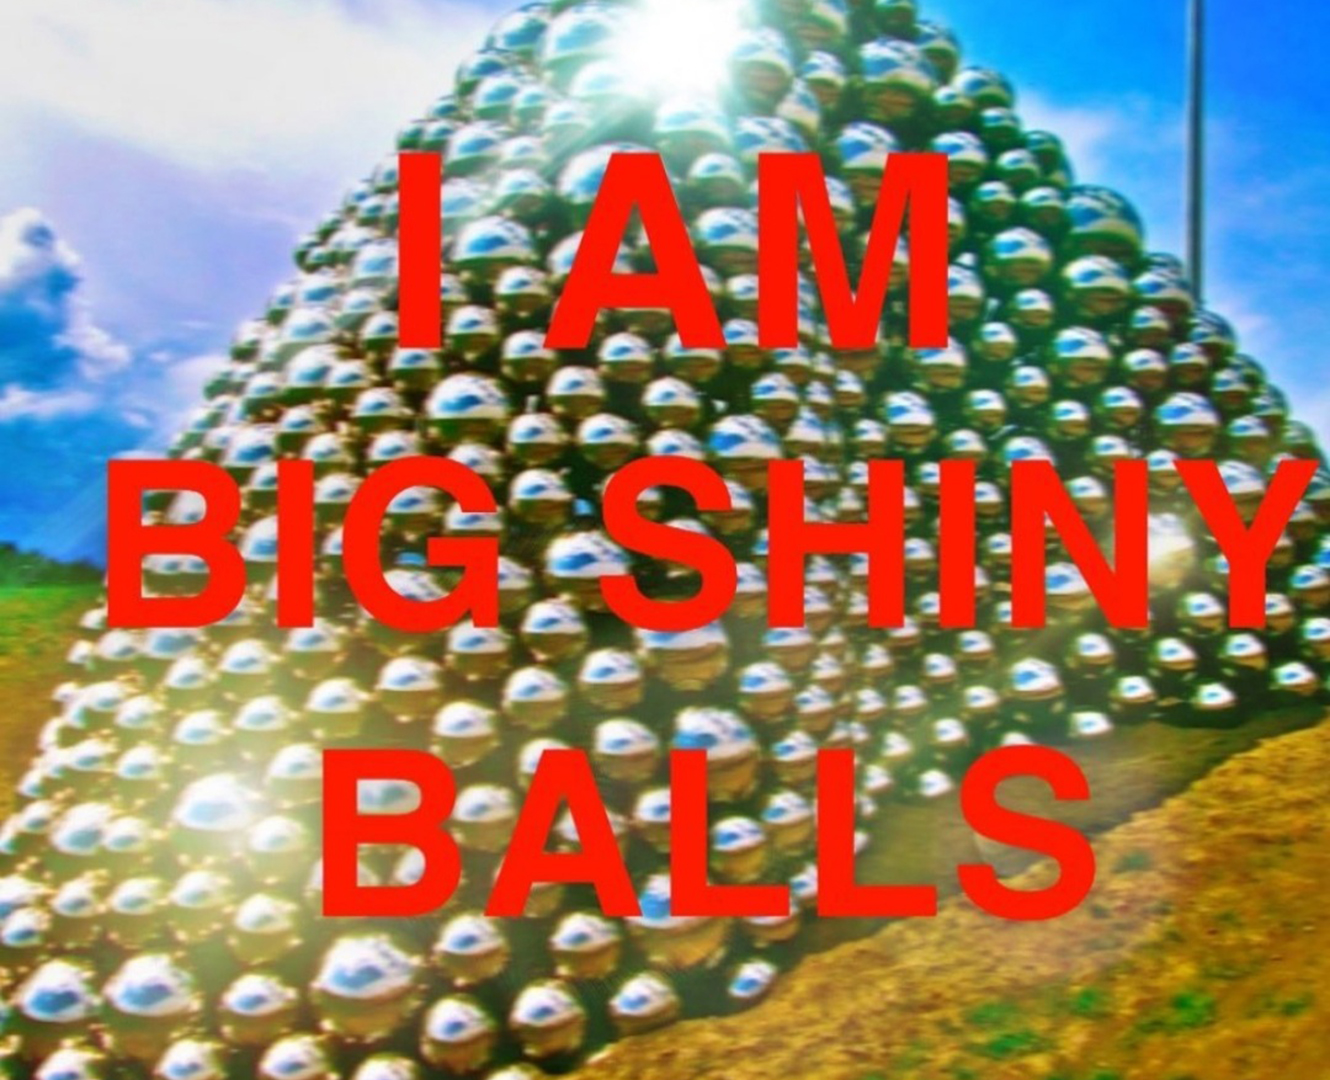 A picture of the silver balls in Edmonton with the caption "I am big shiny balls"